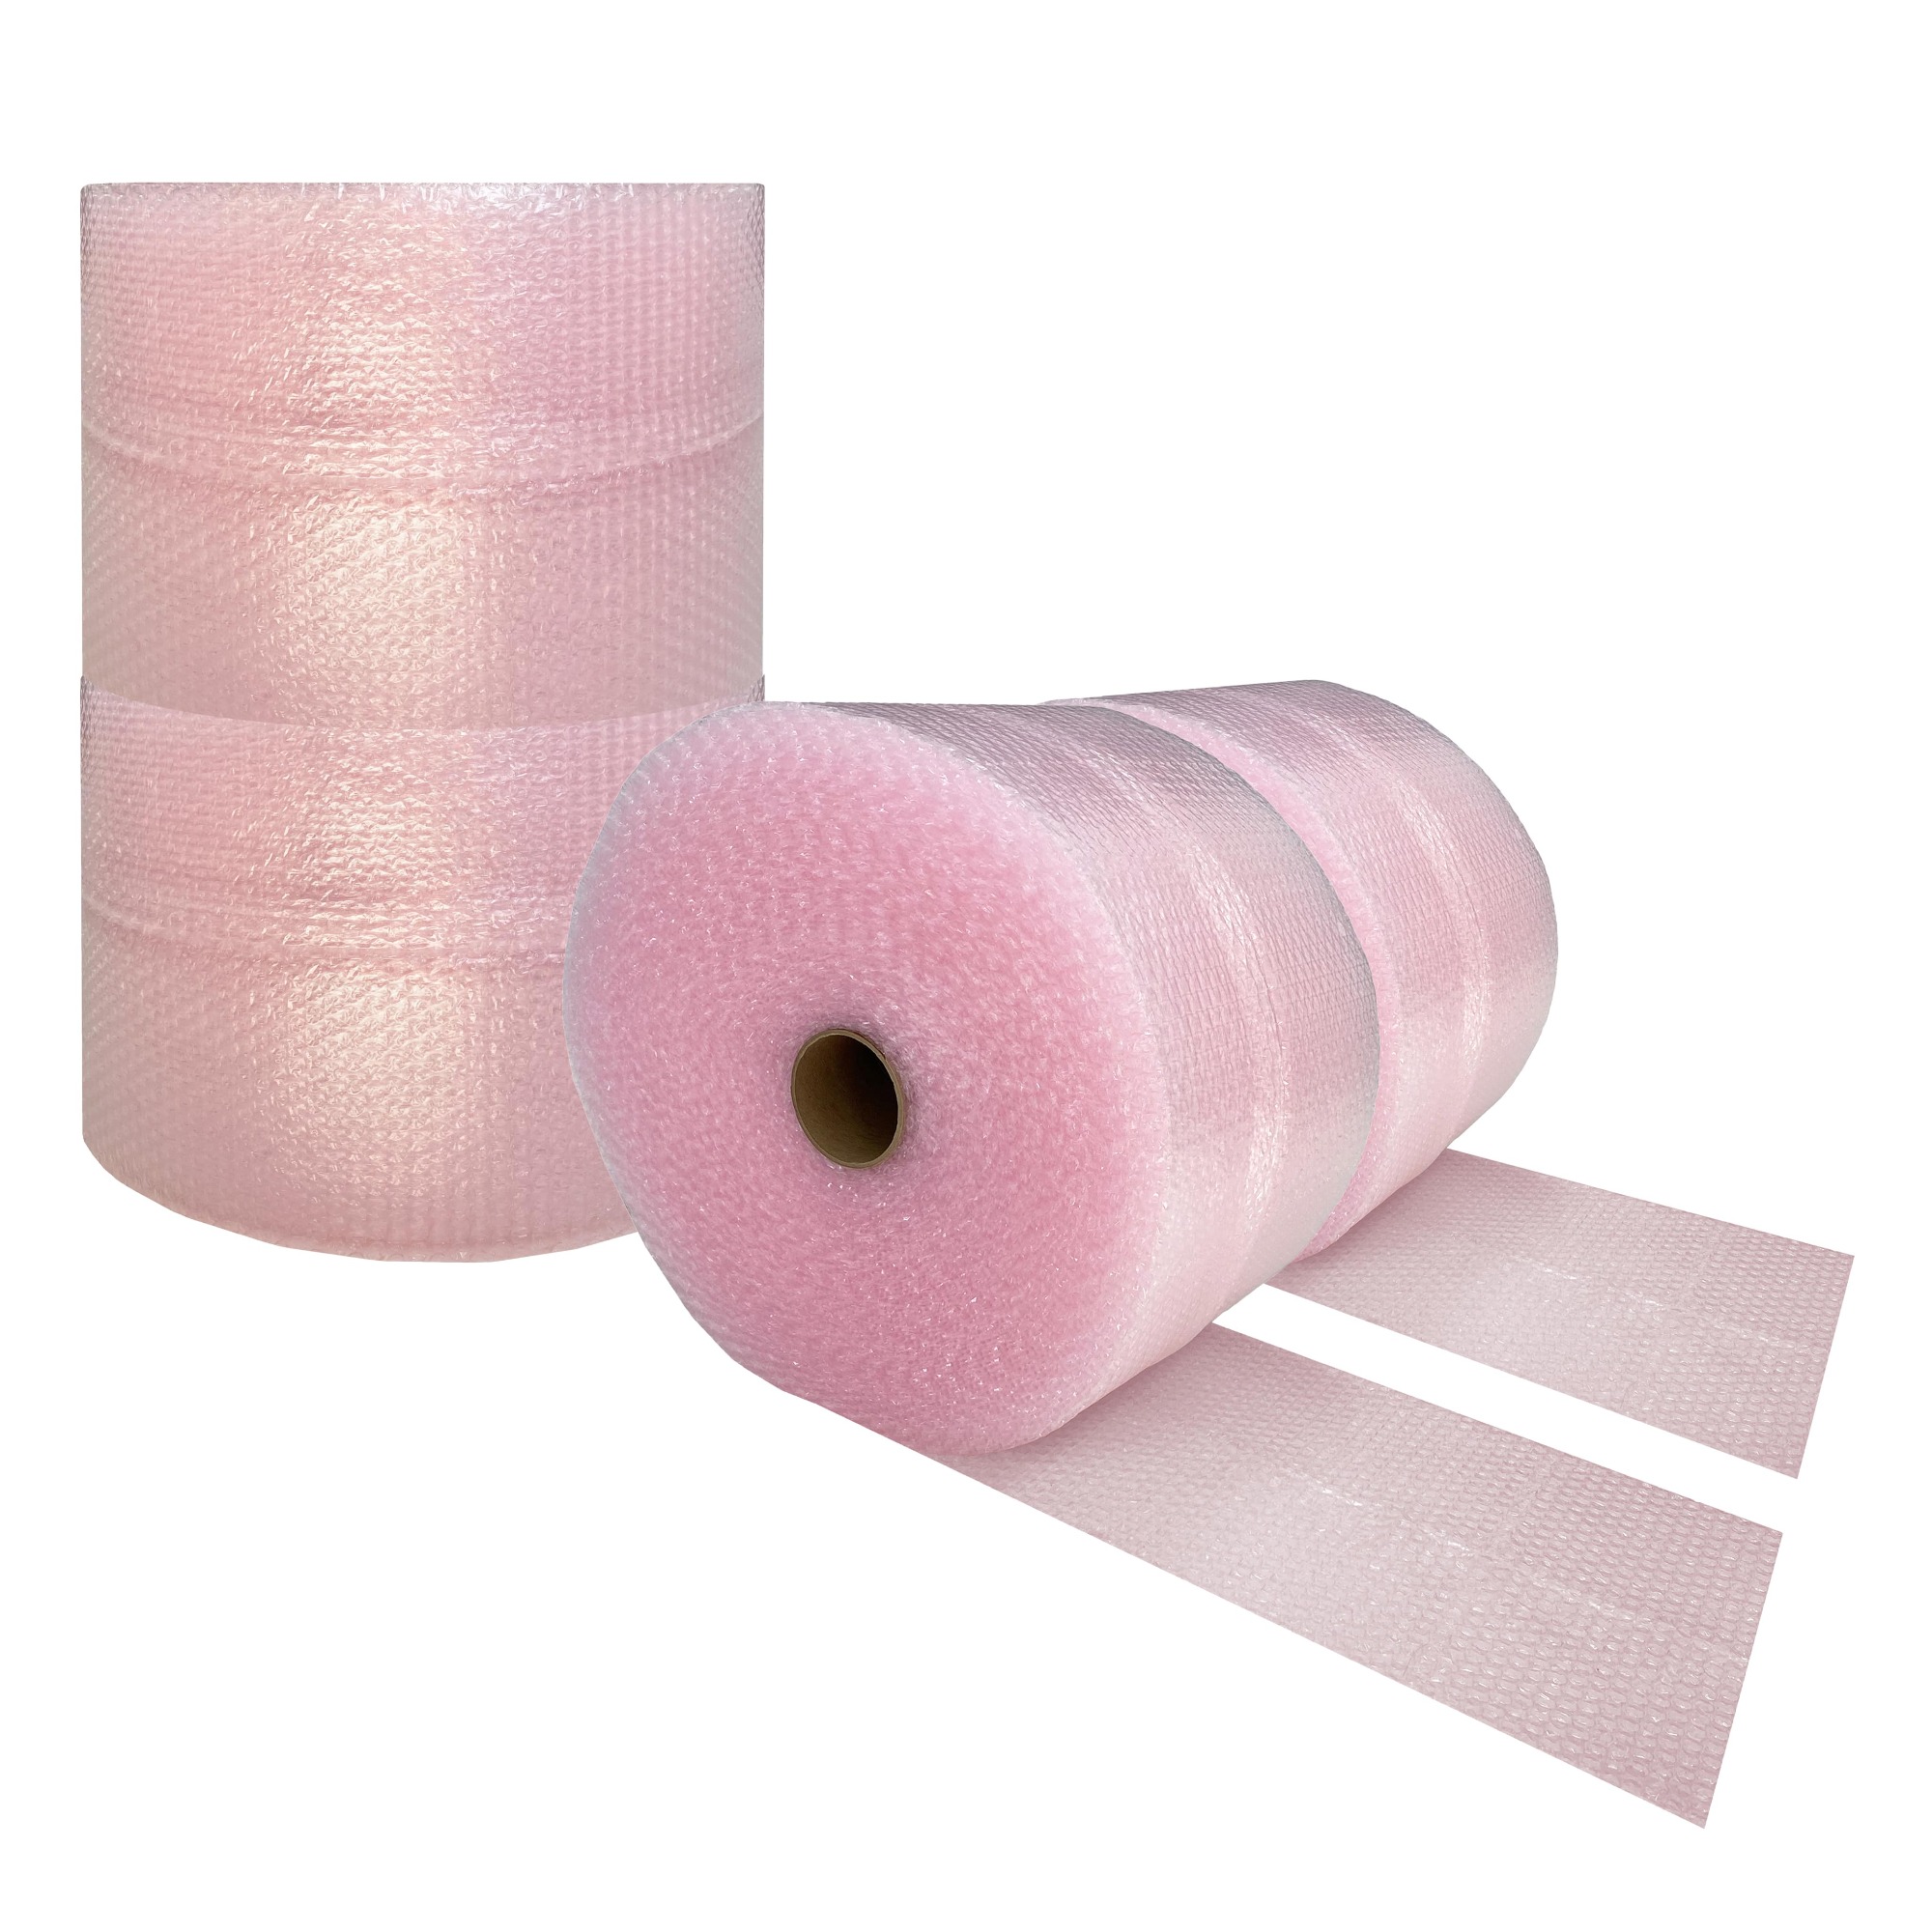 Uoffice 4 Pink Anti-Static Bubble Rolls 175'x12 inch - Small Bubbles 3/16 inch Wrap 700' Total